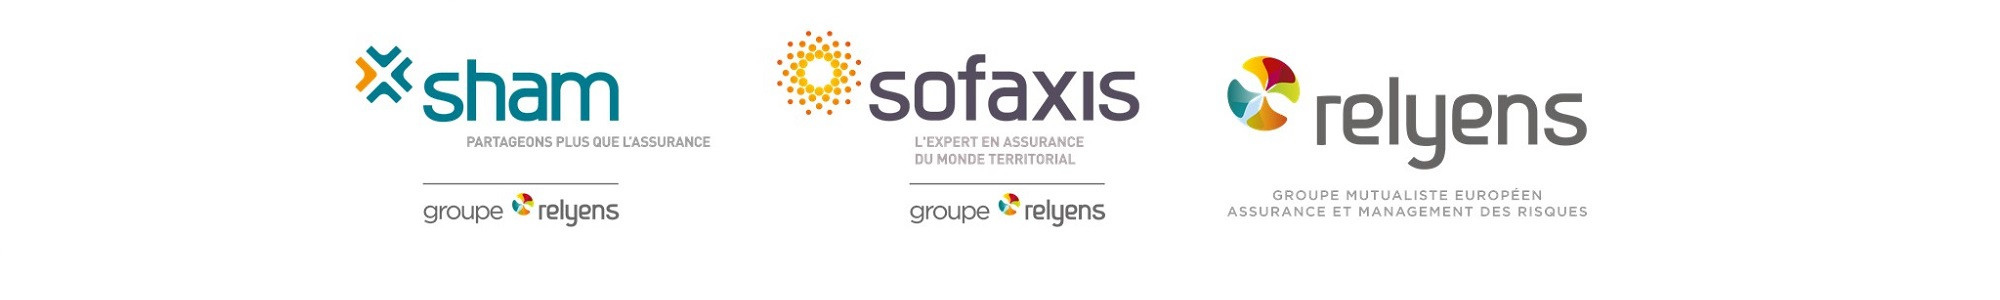 Sham-et-Sofaxis-Groupe-Relyens